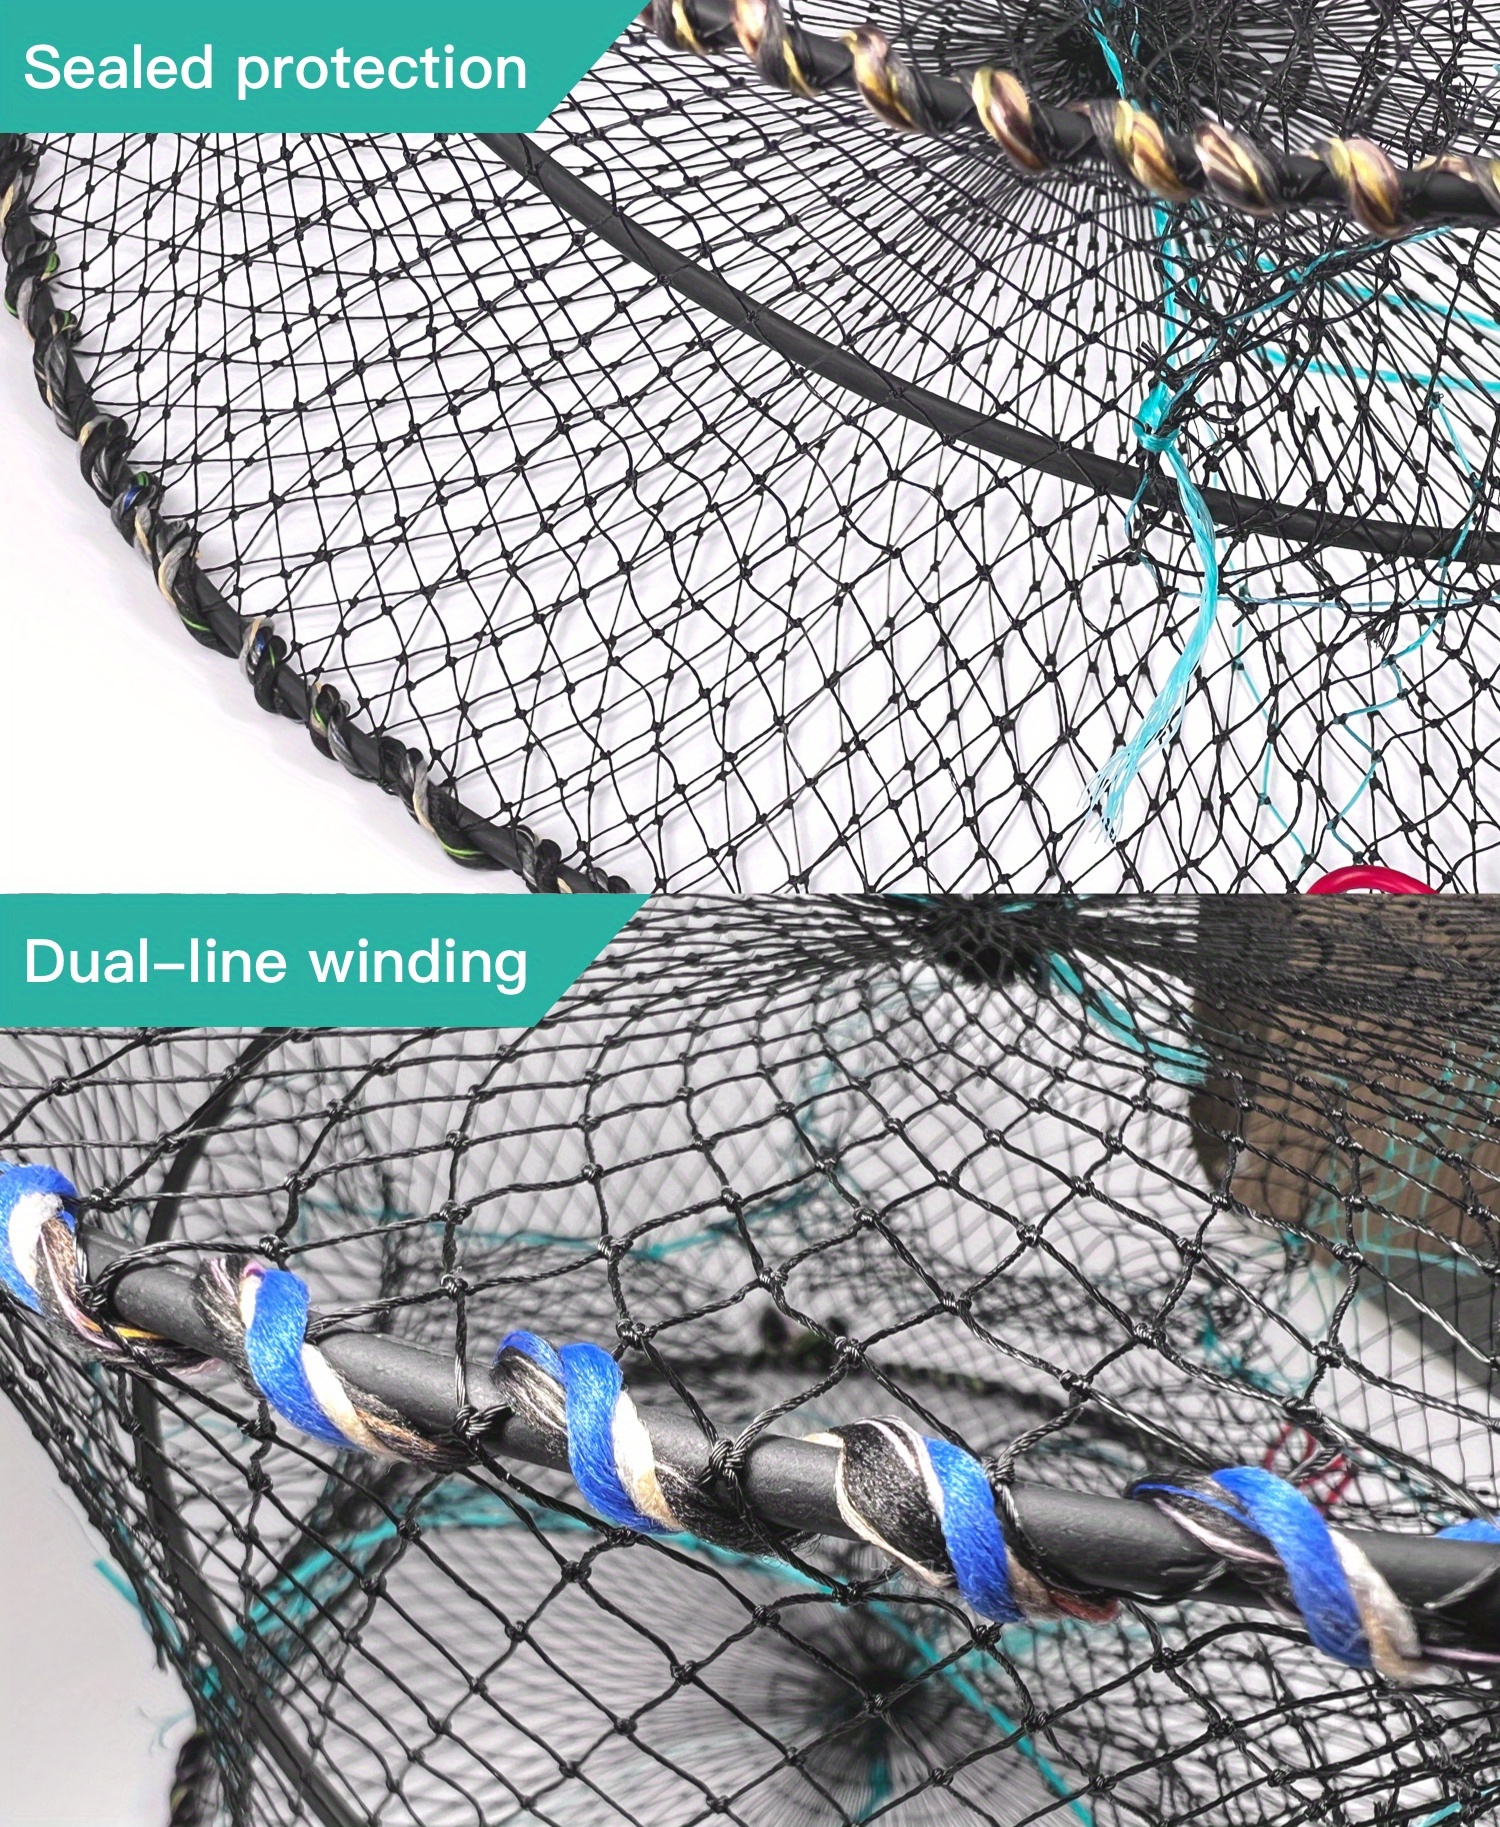 D-GROEE Fishing Net Mesh Fish Trap Collapsible Fish Fishing Keep Net for  Keeping Lures Crayfish Crab Fishes Shrimps Lobsters, Foldable Fishing Mesh